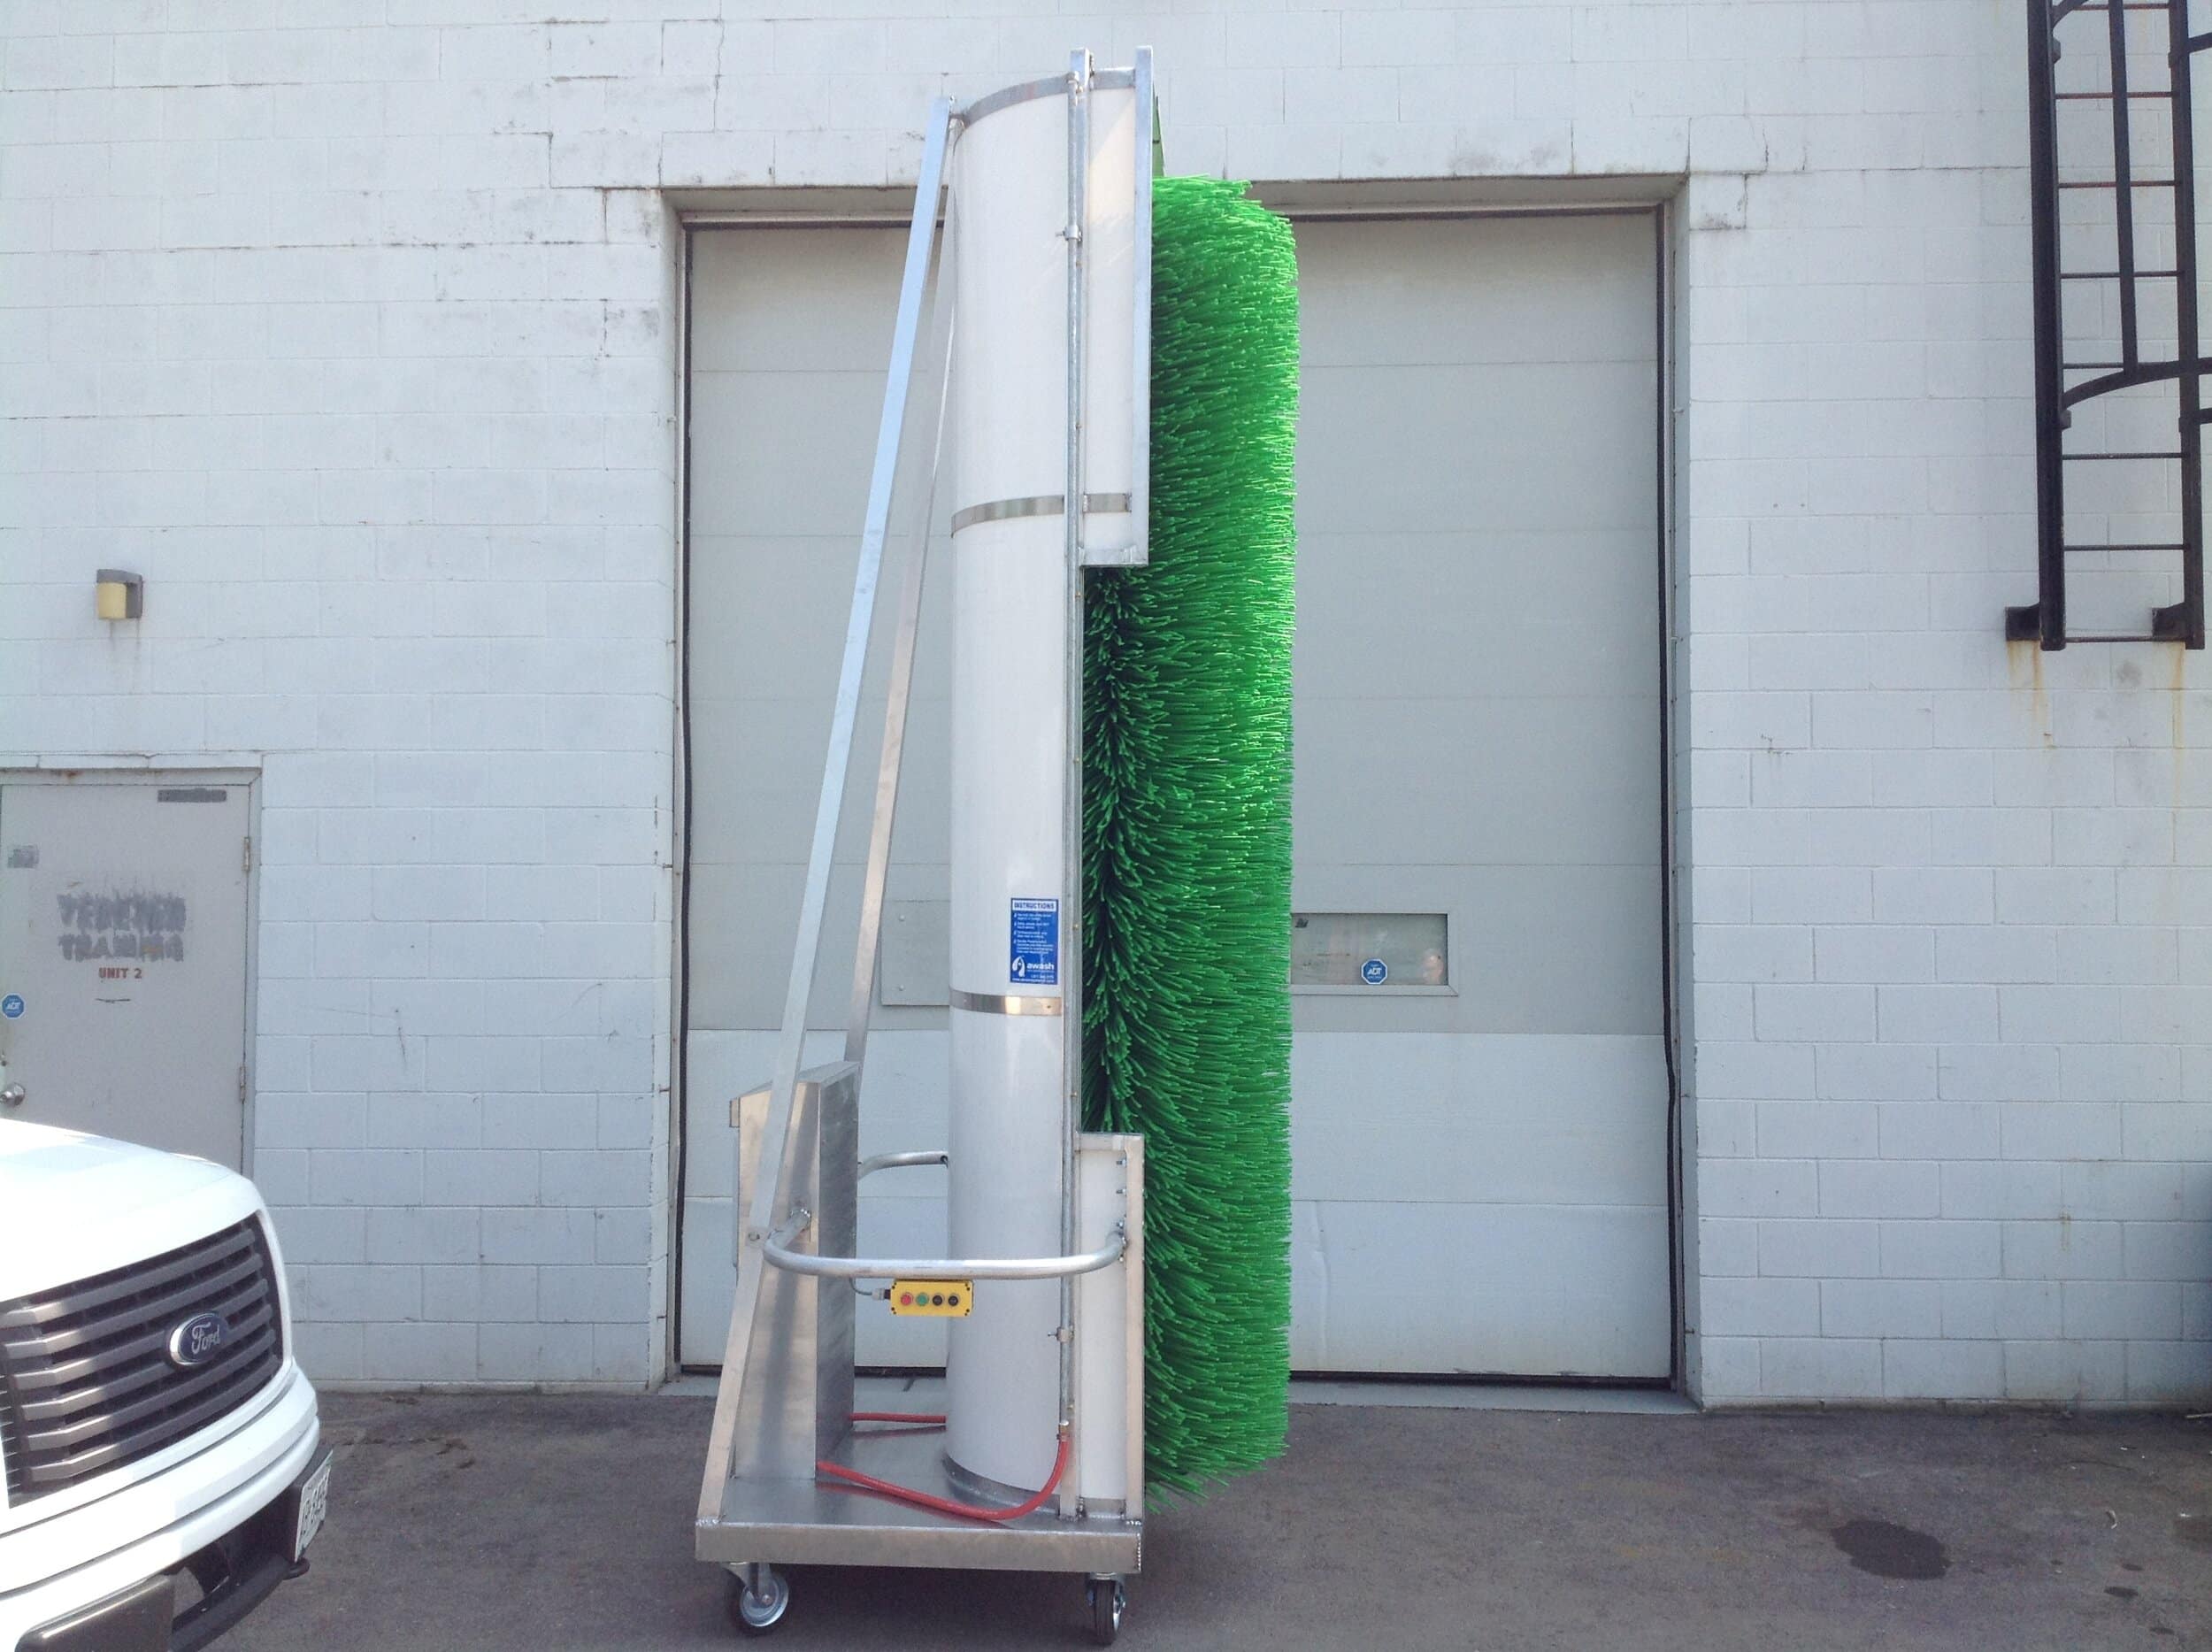 A large cylindrical brush attached to a frame with wheels is stationed in front of a warehouse door.